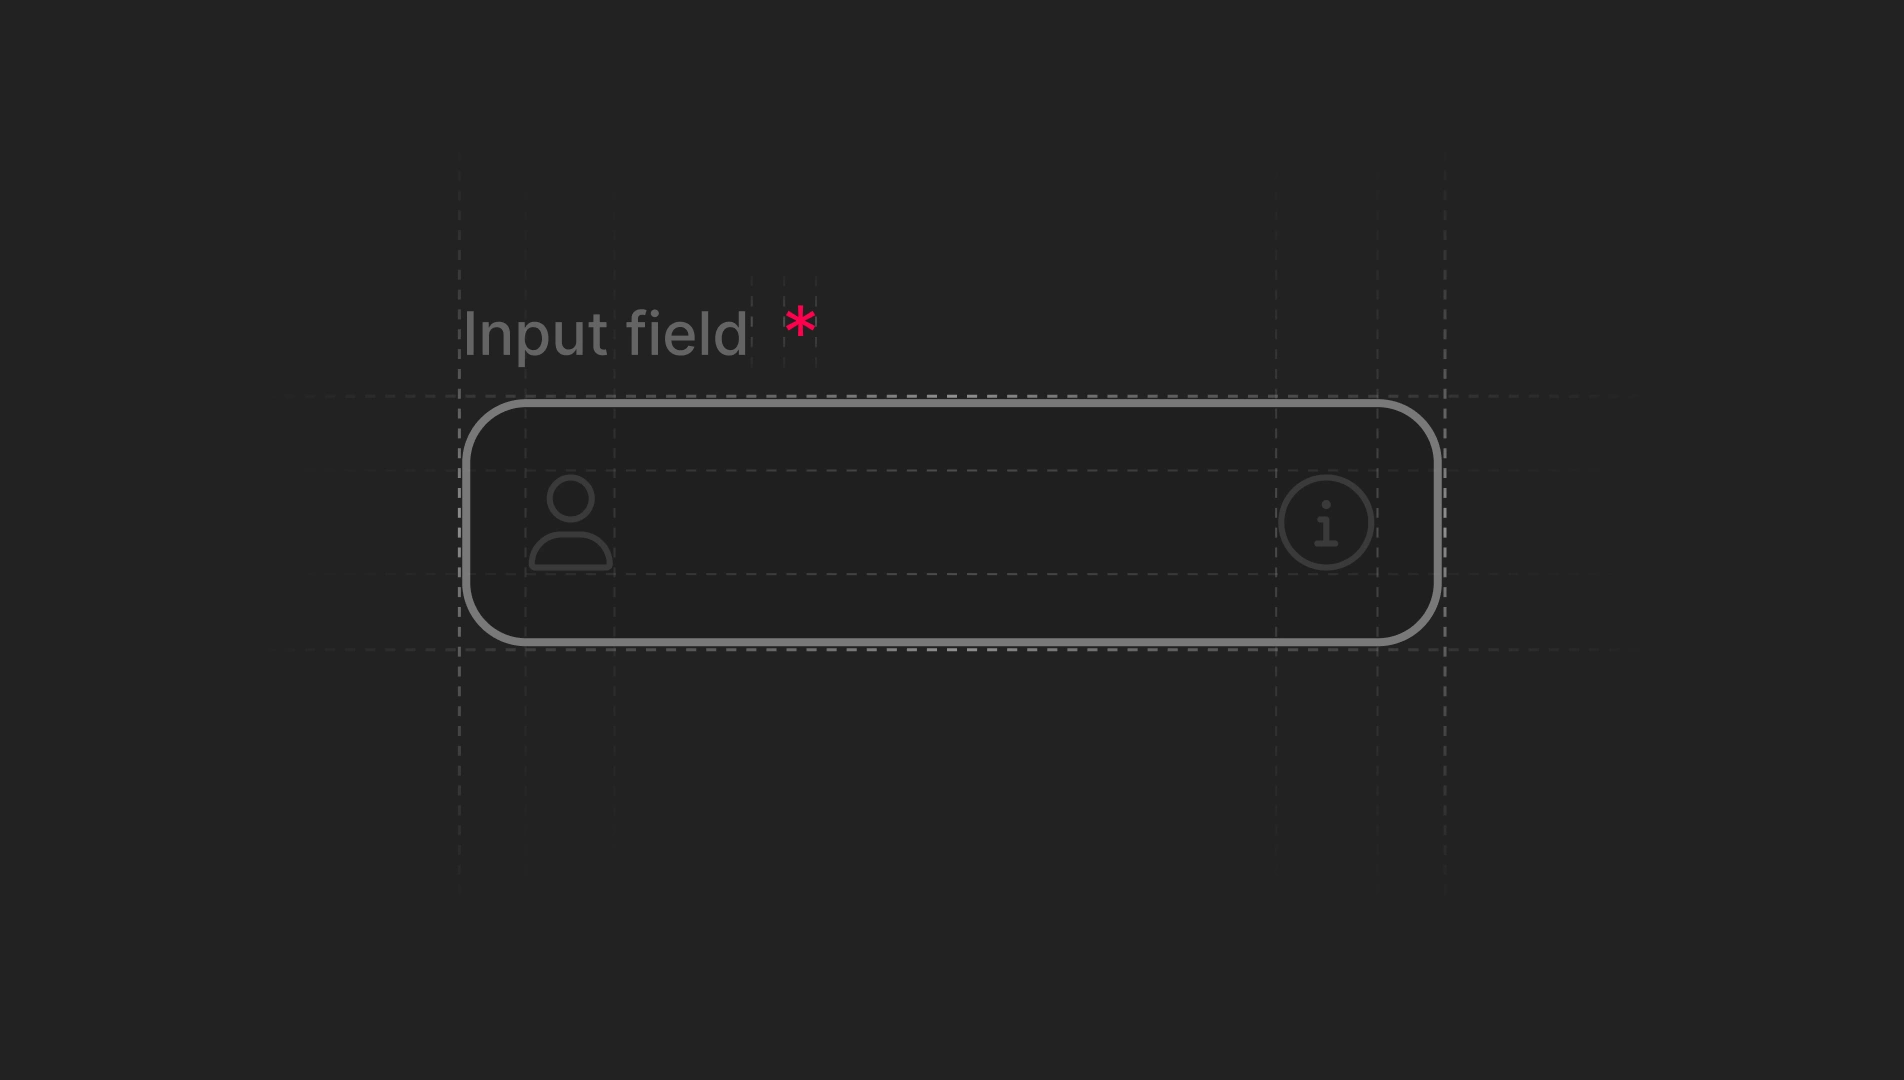 Required Inputs Fields